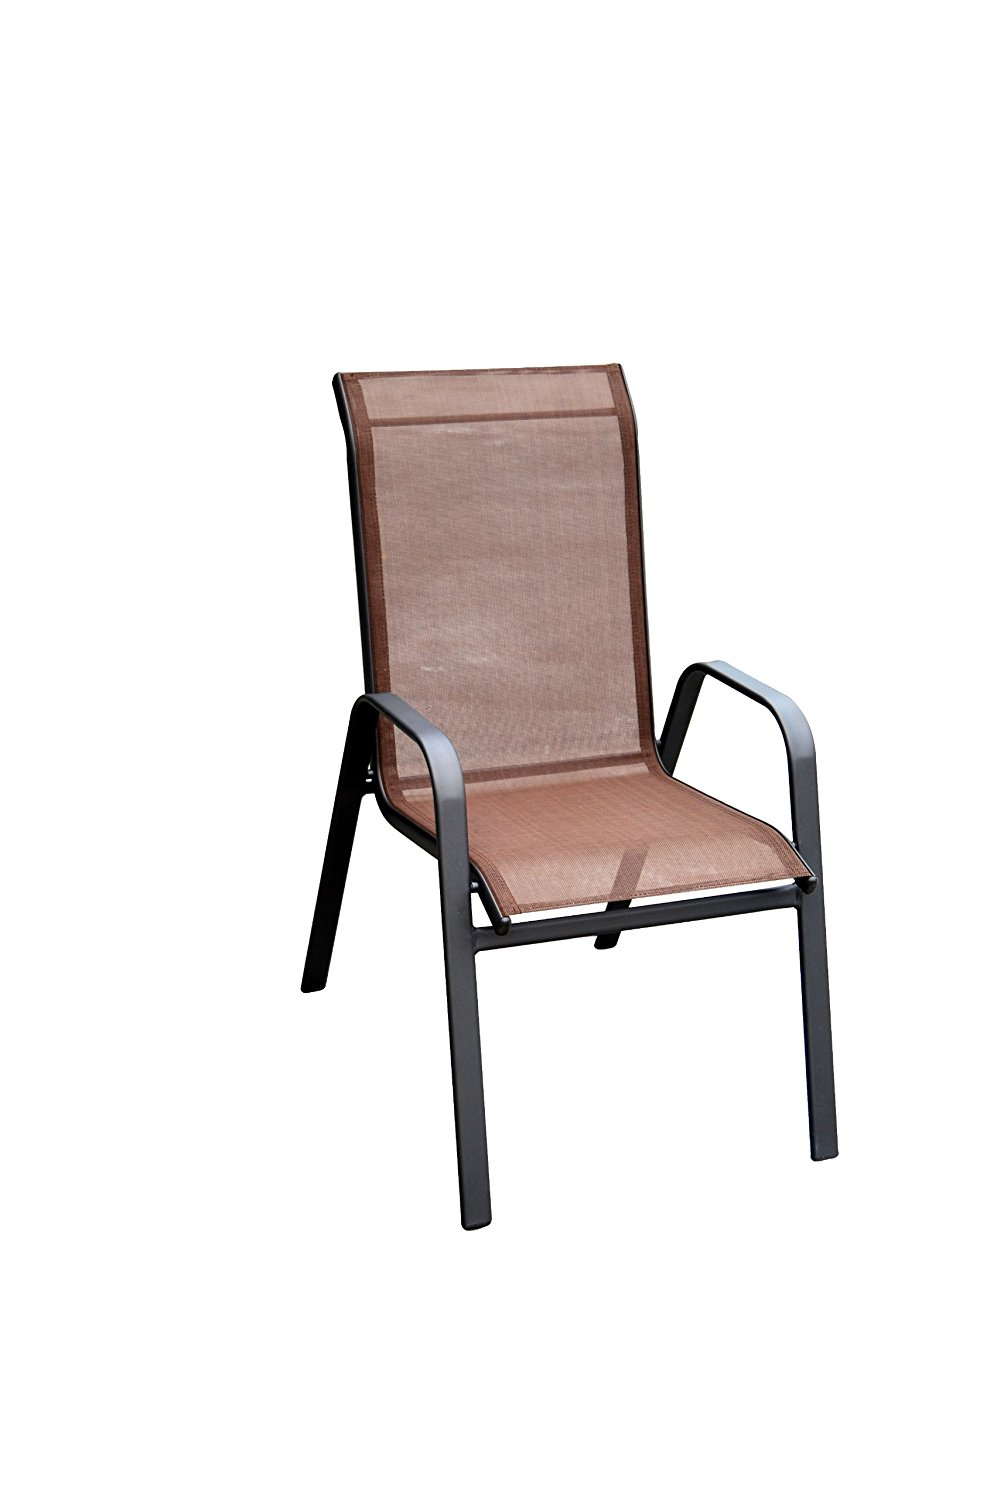 Slingback Patio Chairs Reviews And Information Outsidemodern within proportions 1004 X 1500